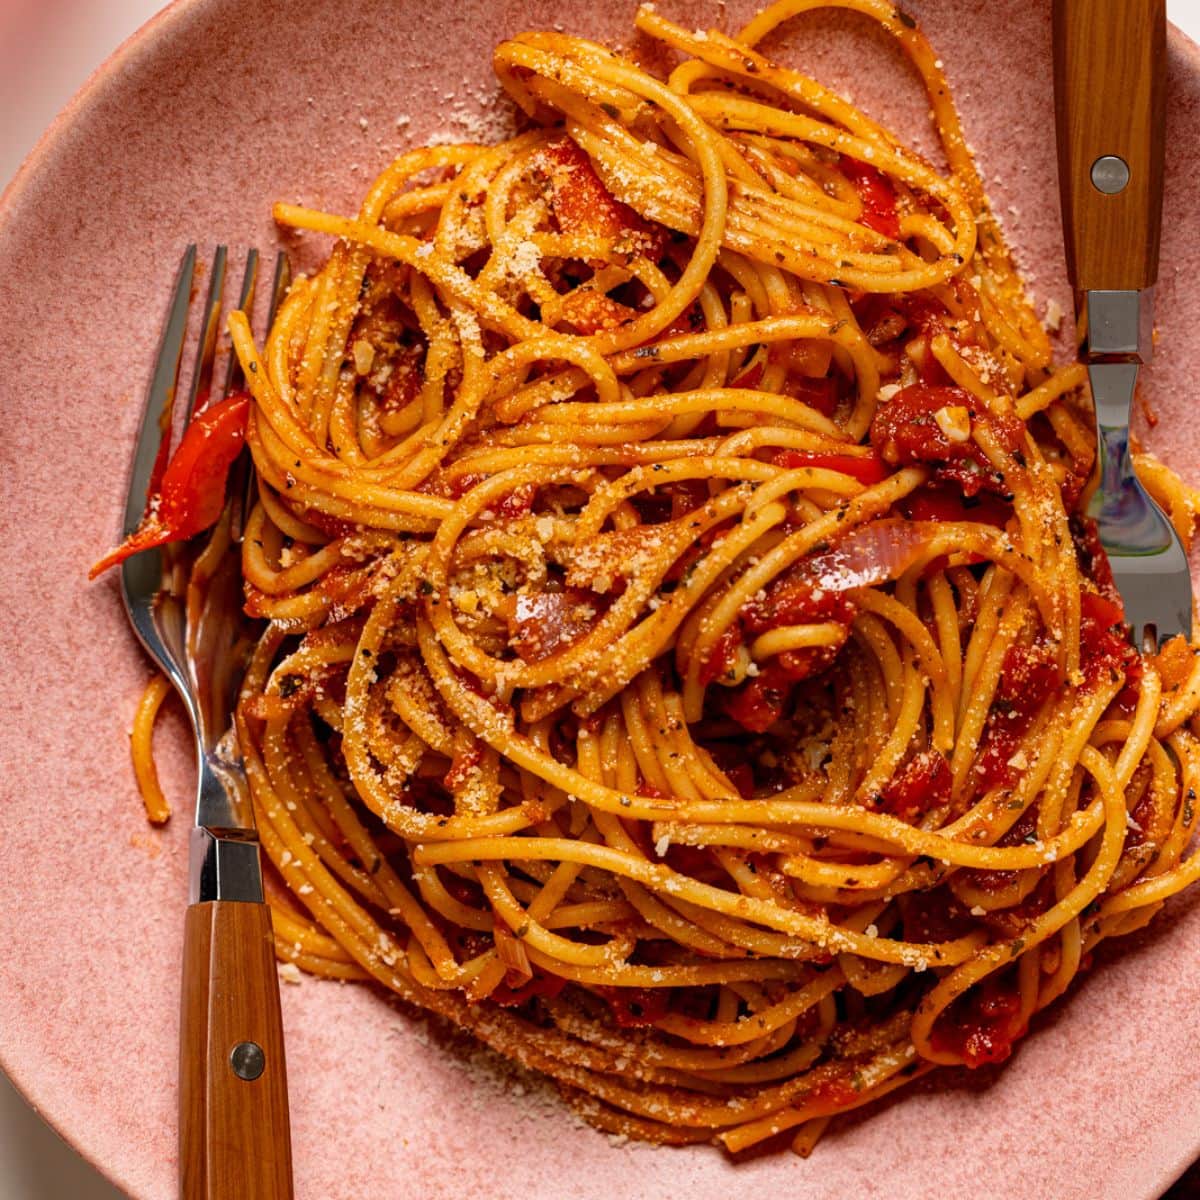 Up close shot of spaghetti in a pink plate.